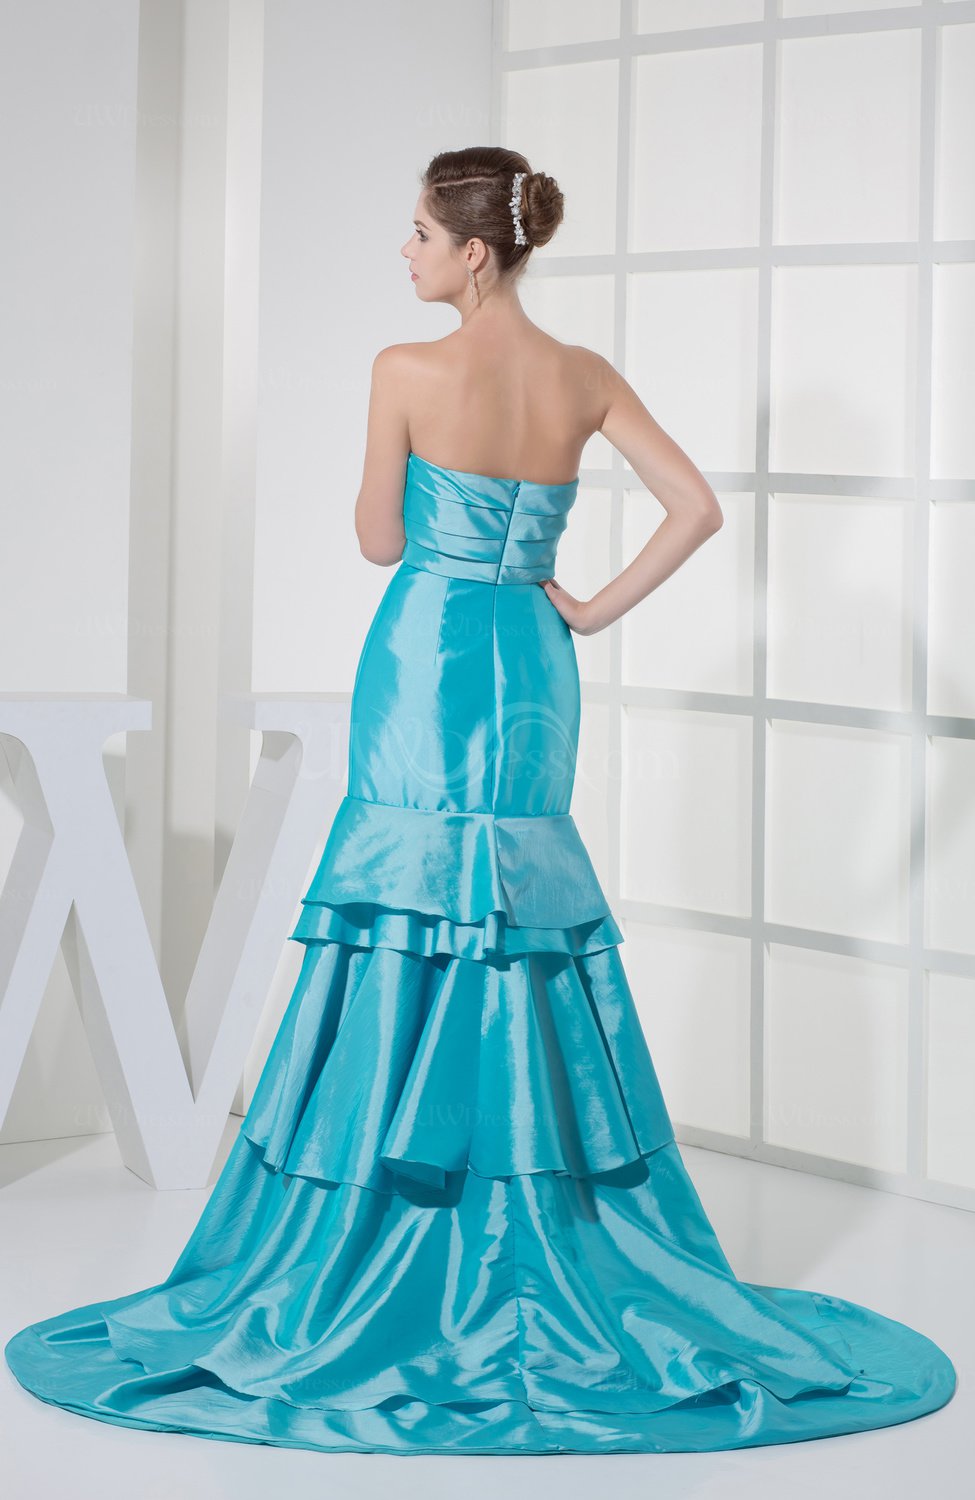 Teal Simple Church Fit-n-Flare Strapless Sleeveless Court Train Bridal ...